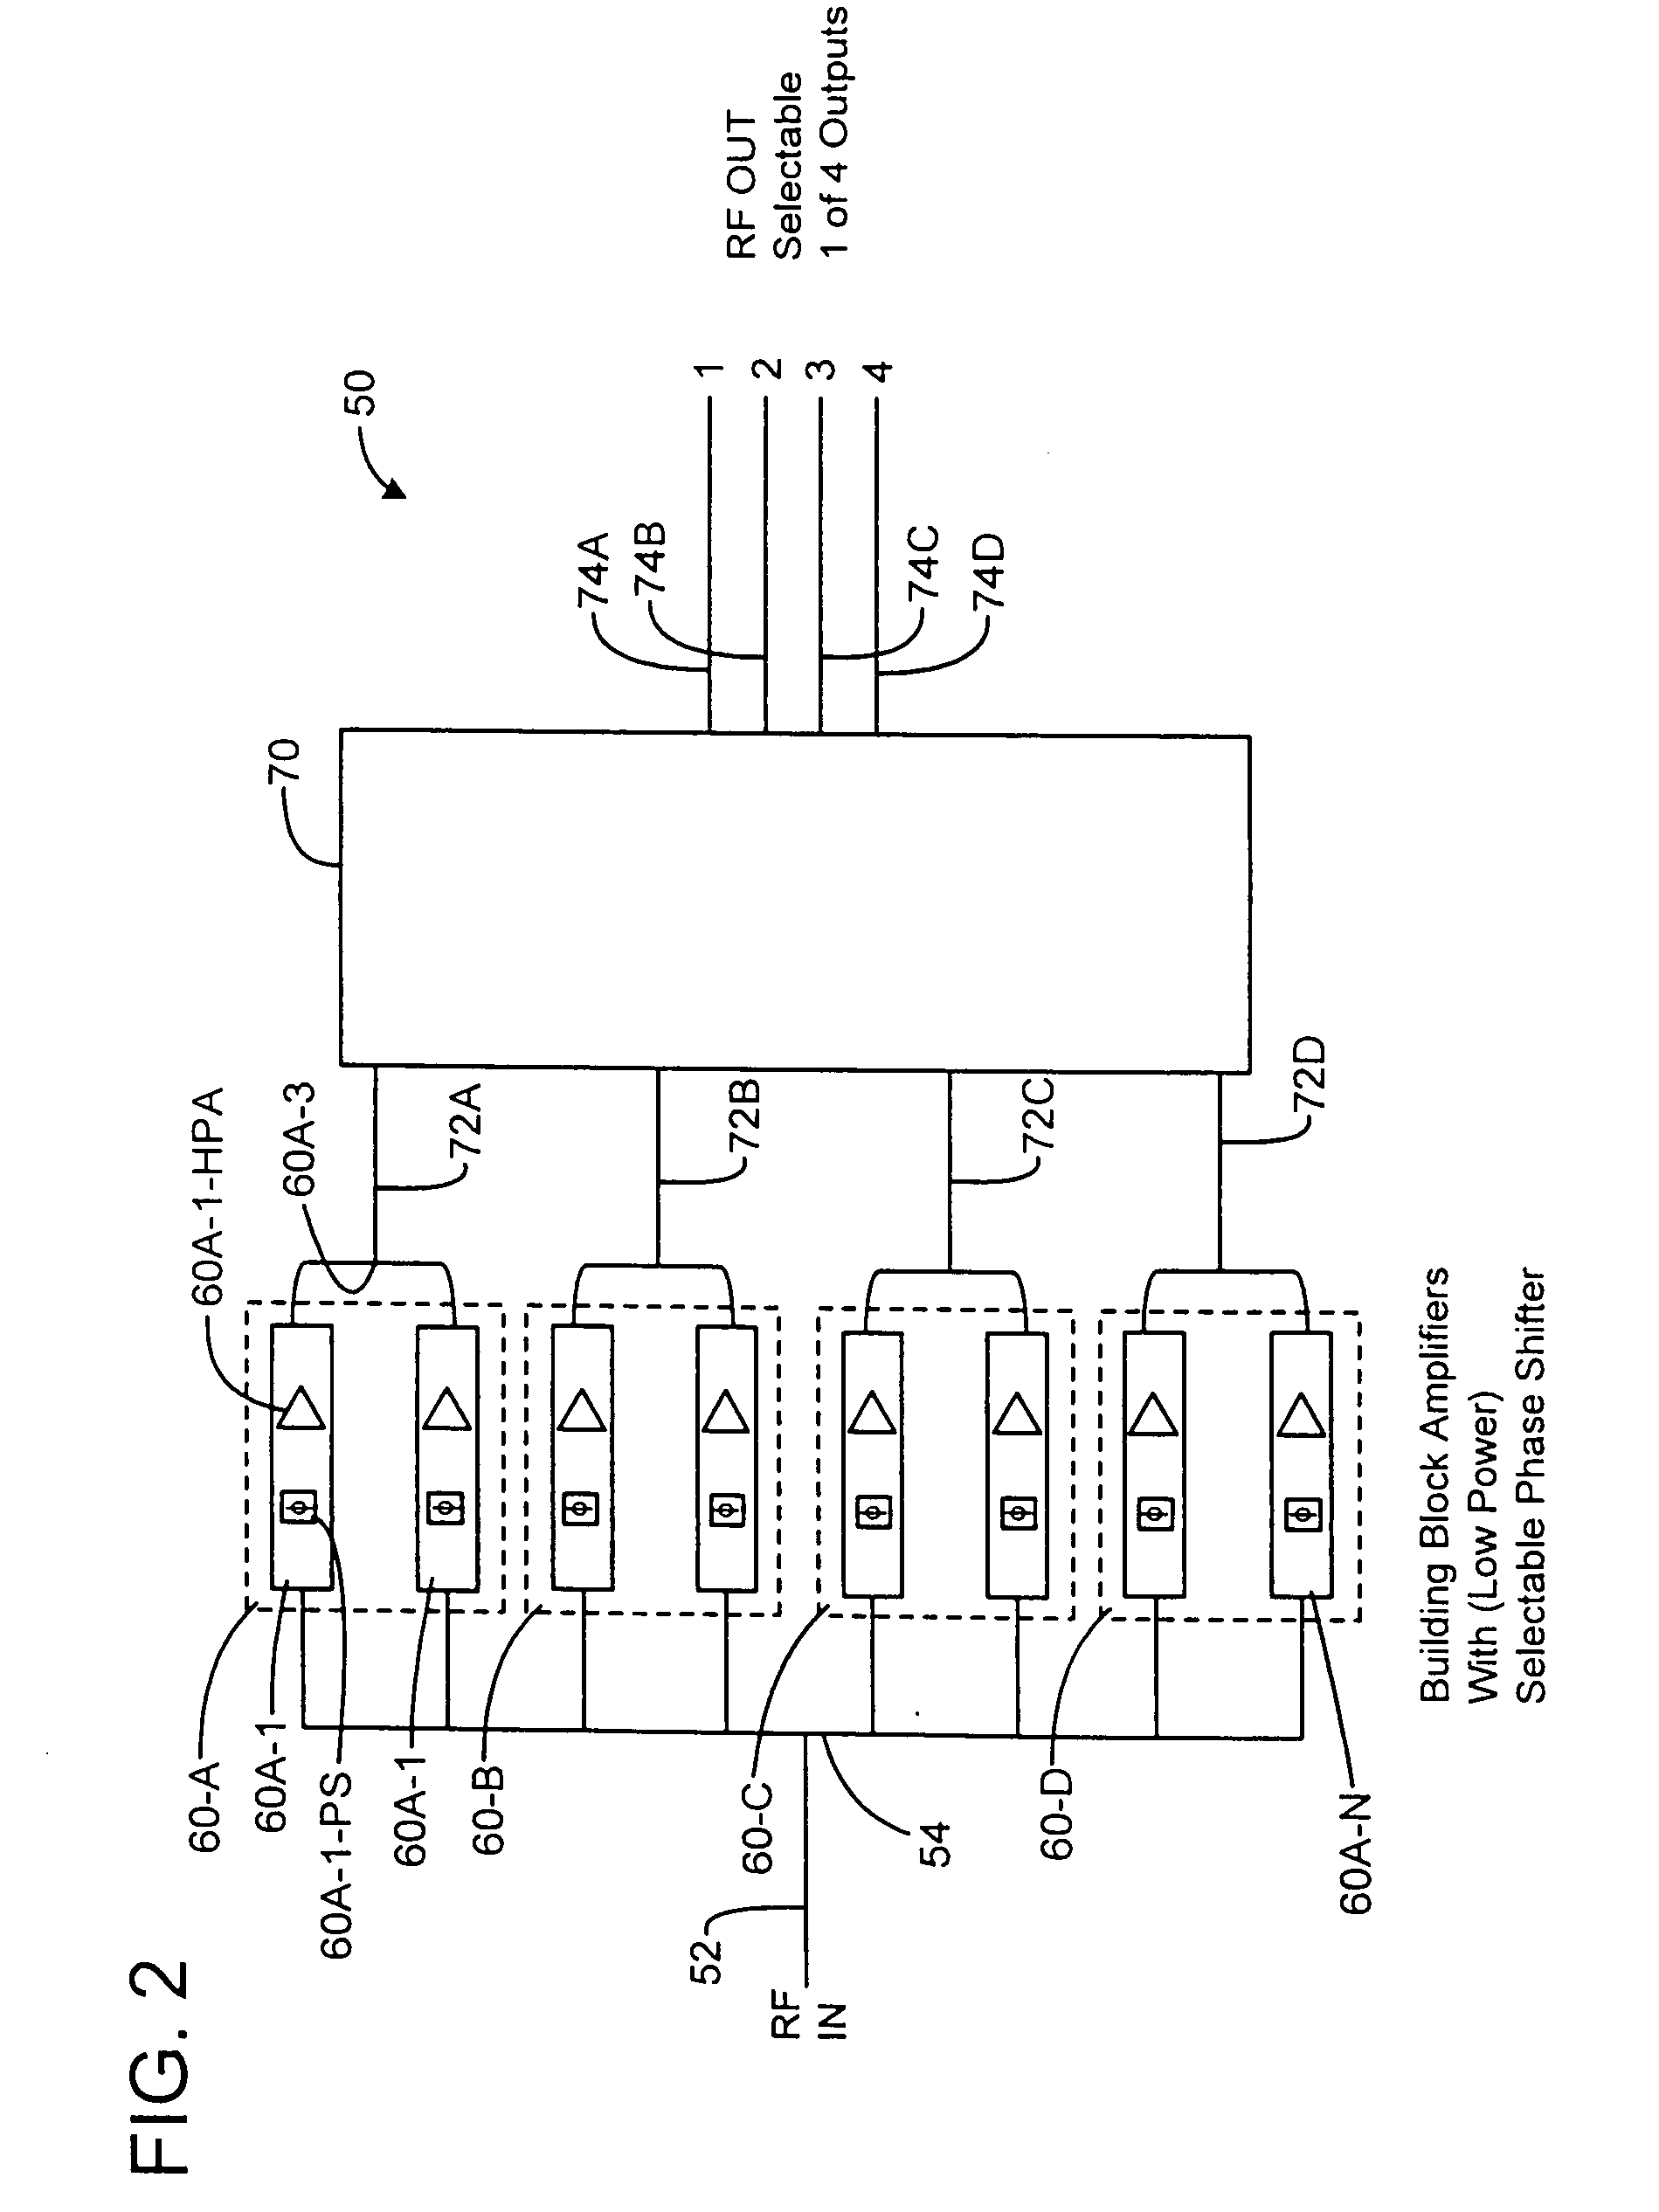 High power commutating multiple output amplifier system